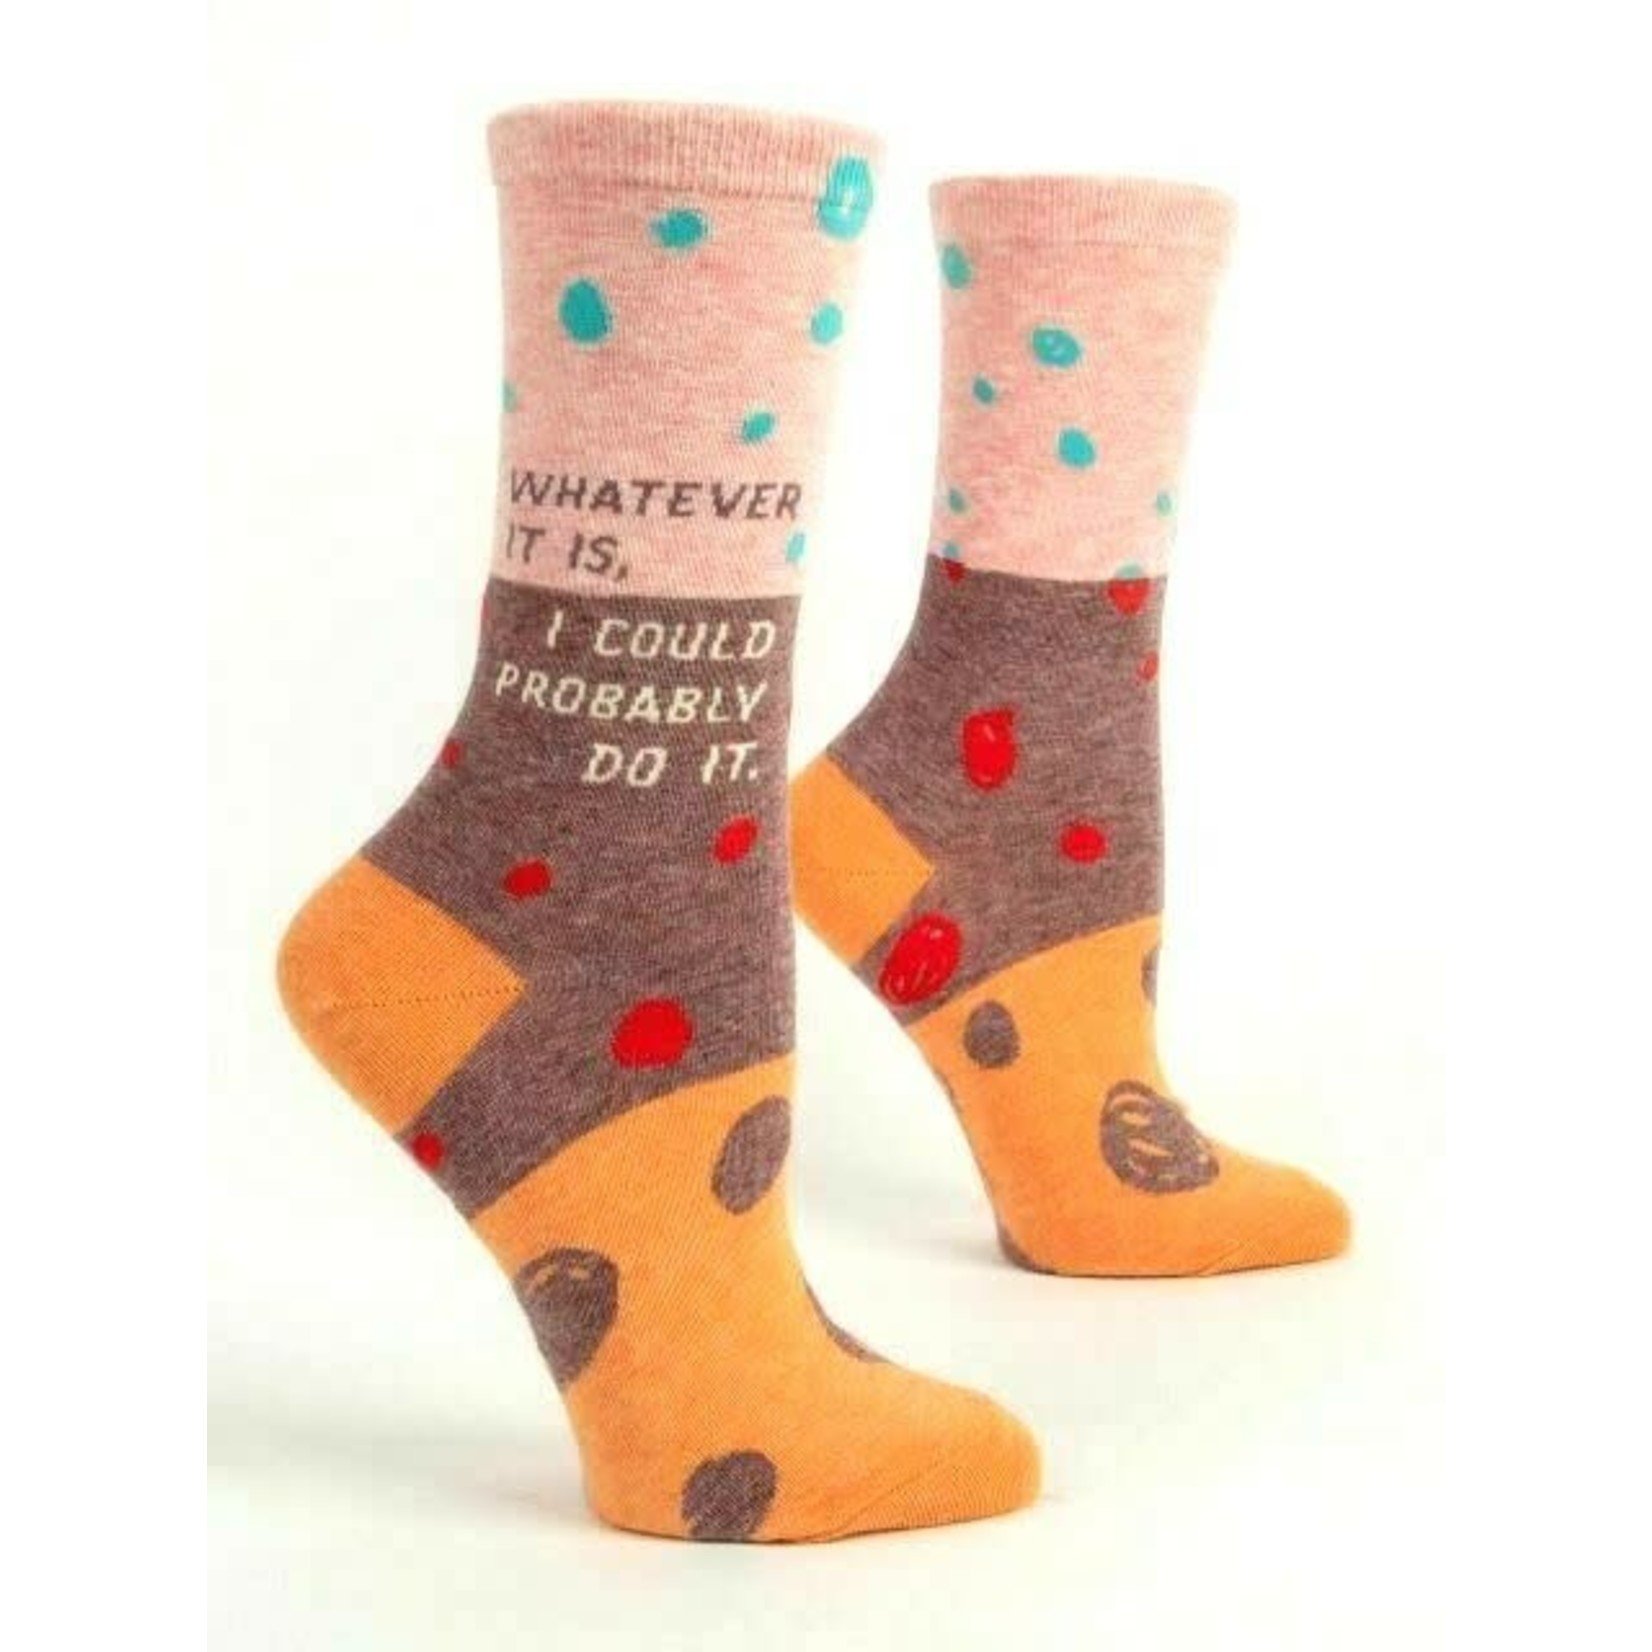 Socks (Womens) - Whatever It Is I Could Probably Do It